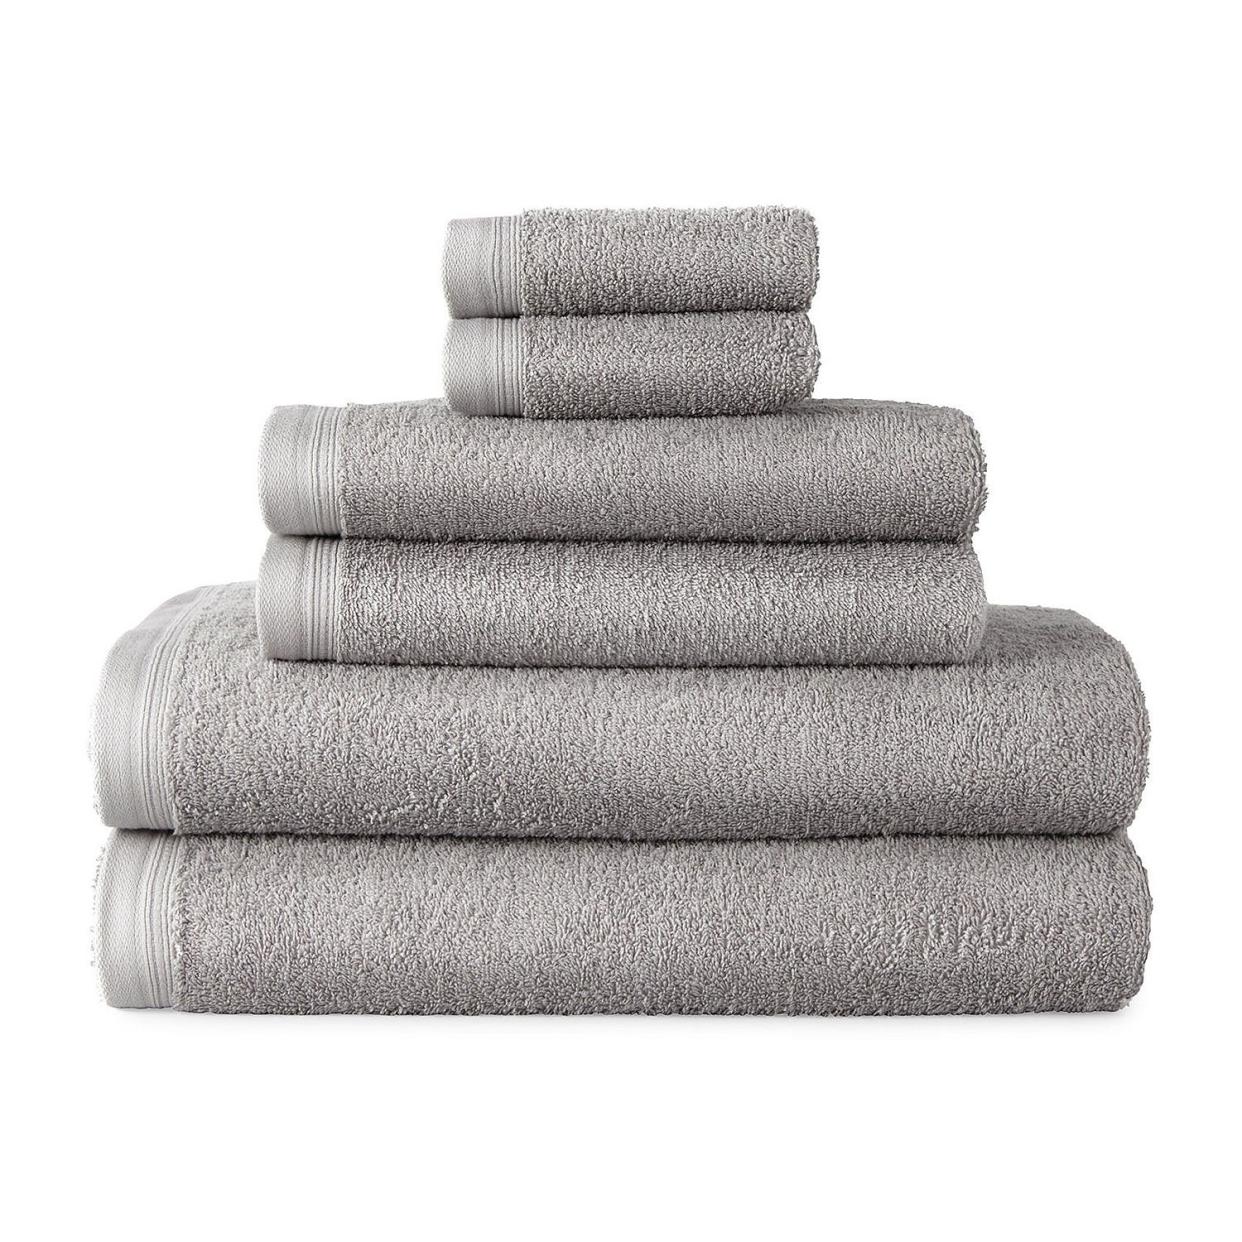 jcpenney bath towels